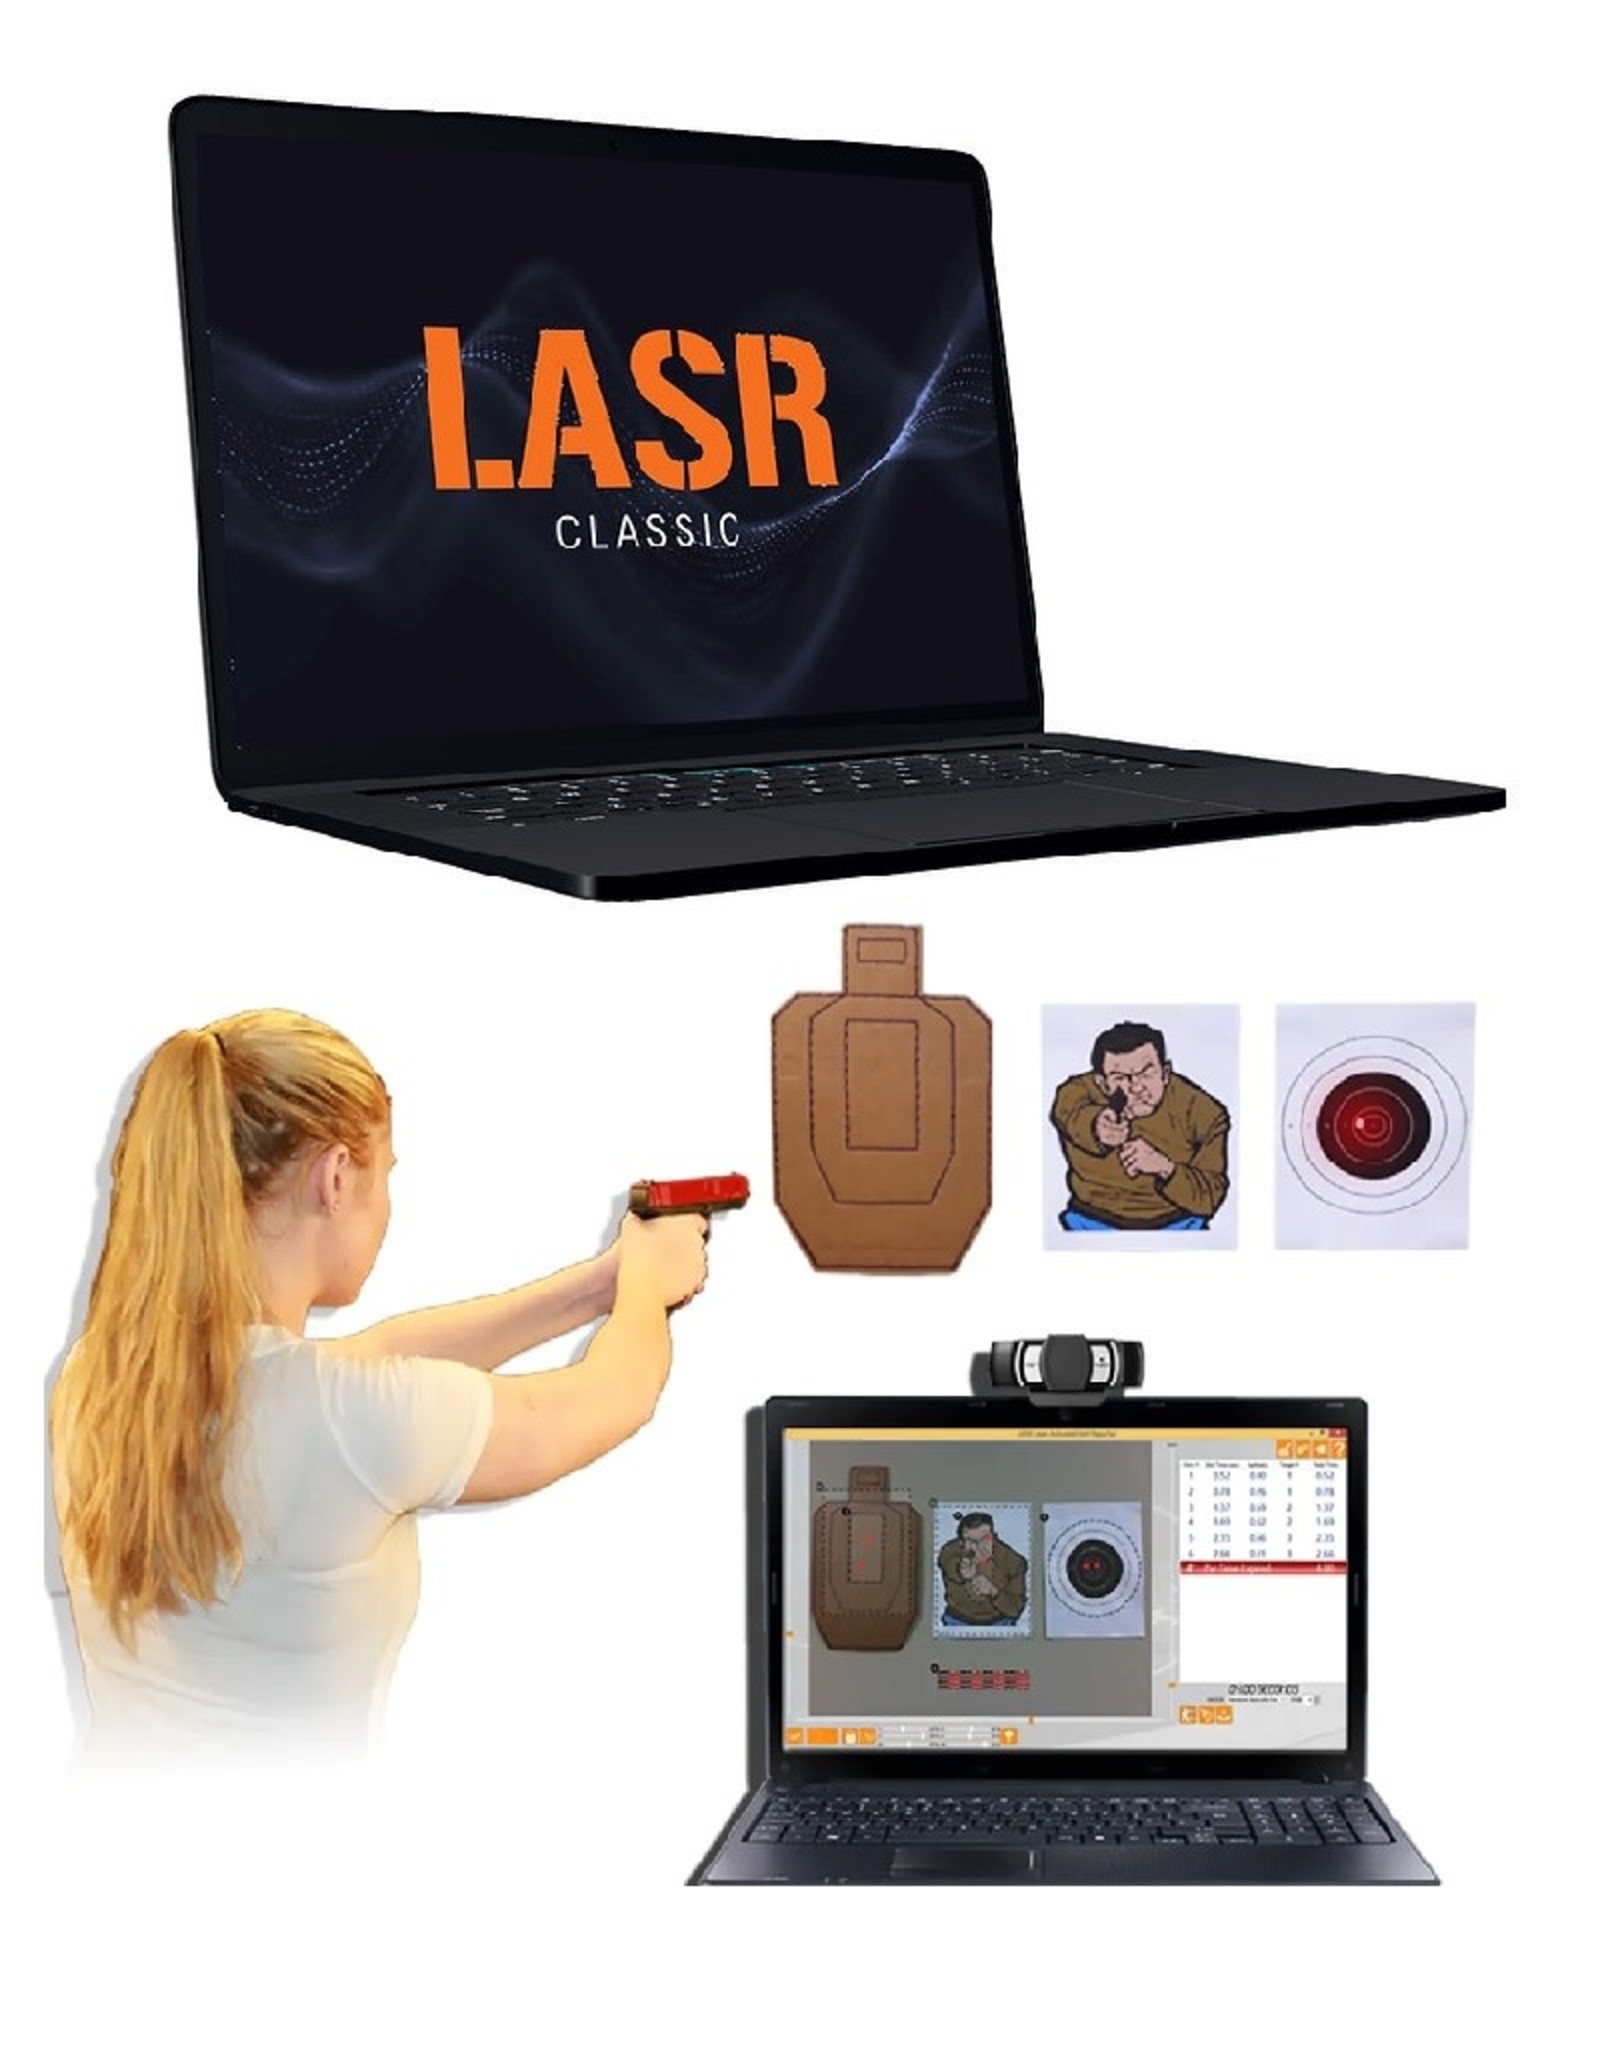 LASR L.A.S.R Classic - Laser Activated Shot Reporter software for Windows PC